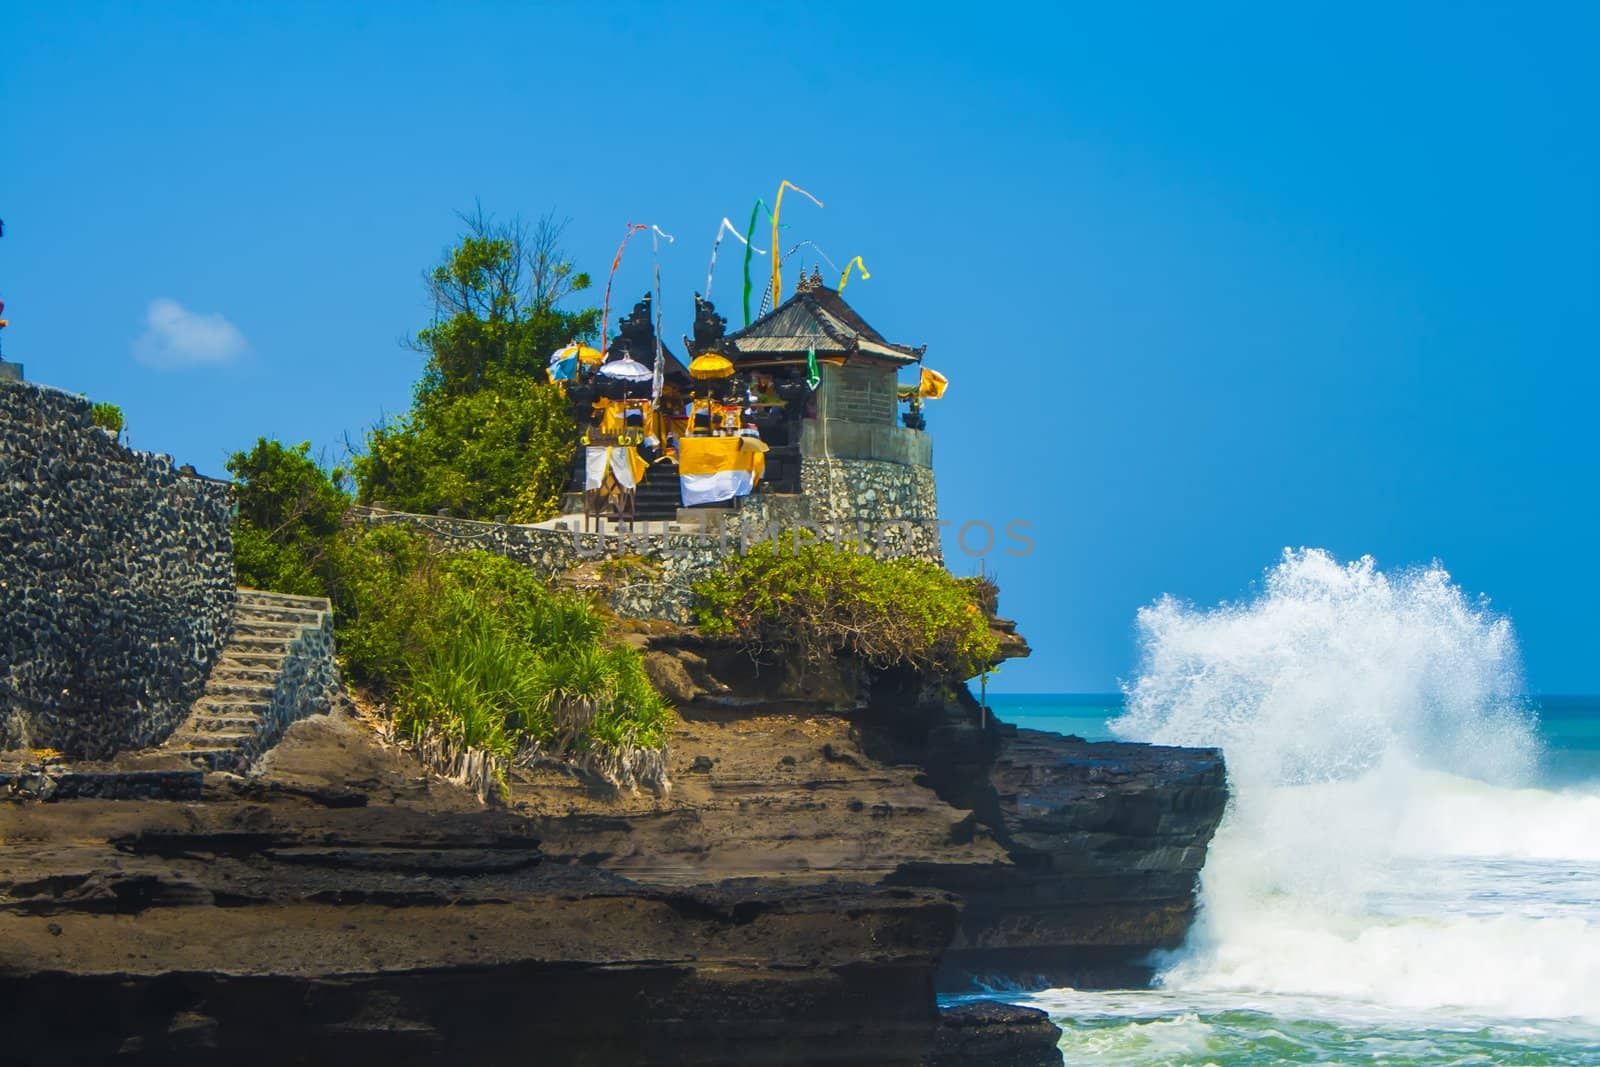 Holy place near Tanah Lot by GNNick